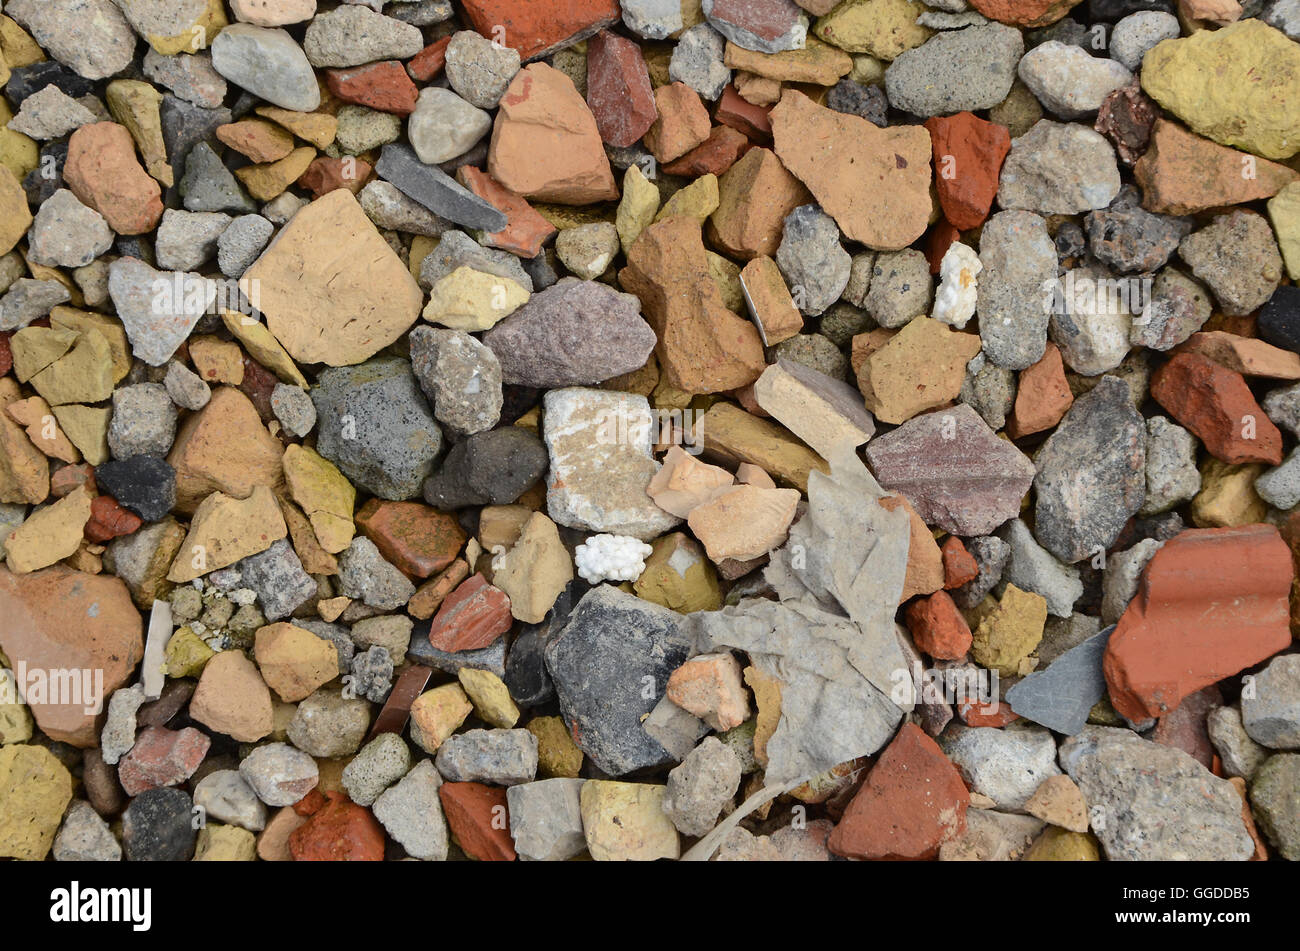 Broken tiles from torn down building serves as temporary road pavement. Stock Photo